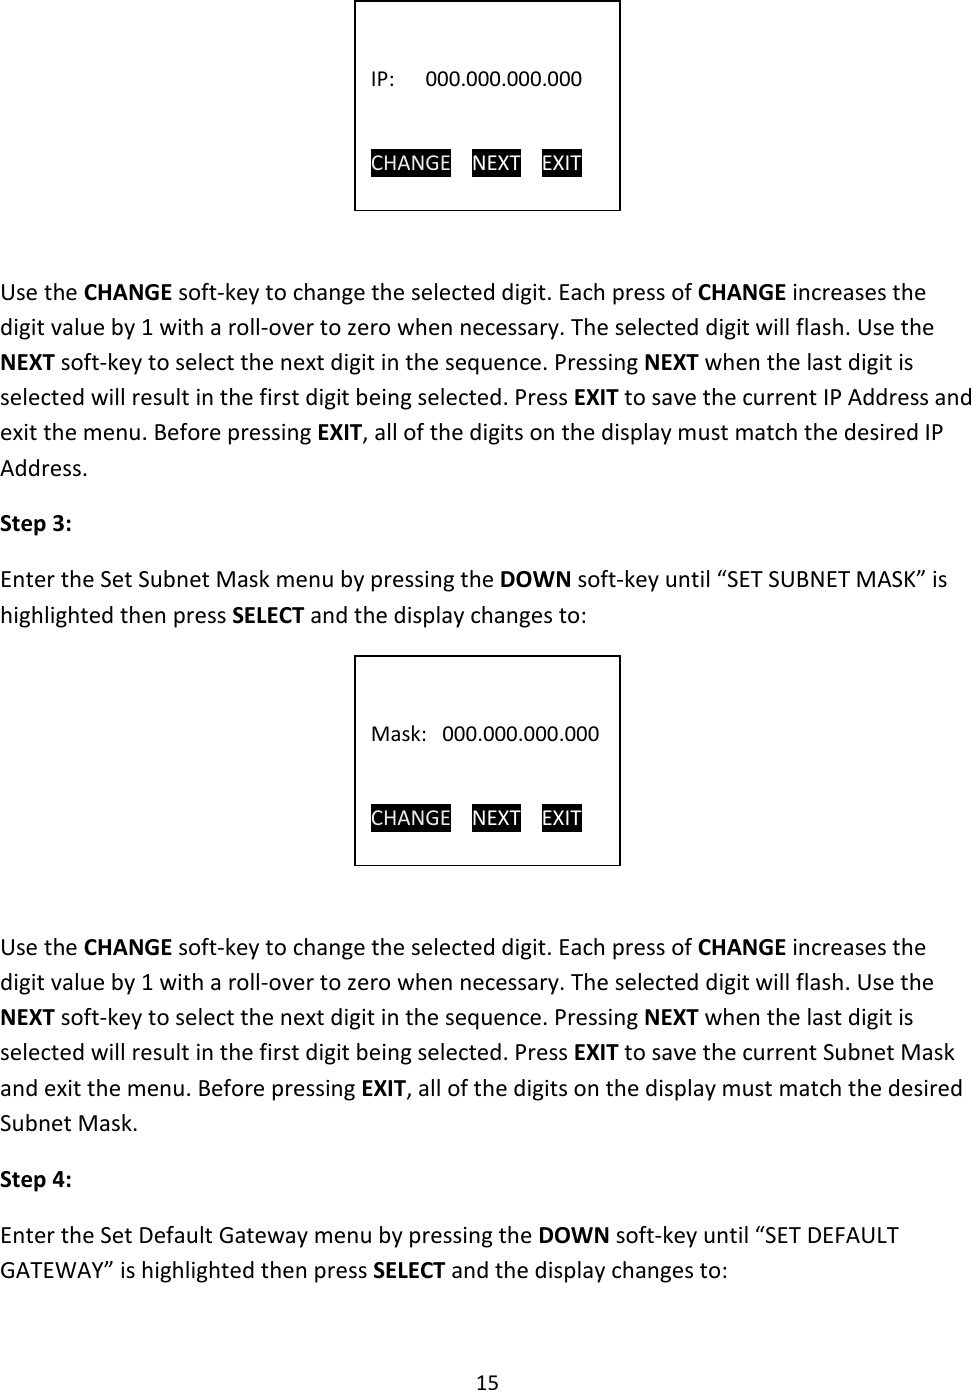 15       Use the CHANGE soft-key to change the selected digit. Each press of CHANGE increases the digit value by 1 with a roll-over to zero when necessary. The selected digit will flash. Use the NEXT soft-key to select the next digit in the sequence. Pressing NEXT when the last digit is selected will result in the first digit being selected. Press EXIT to save the current IP Address and exit the menu. Before pressing EXIT, all of the digits on the display must match the desired IP Address. Step 3: Enter the Set Subnet Mask menu by pressing the DOWN soft-key until “SET SUBNET MASK” is highlighted then press SELECT and the display changes to:      Use the CHANGE soft-key to change the selected digit. Each press of CHANGE increases the digit value by 1 with a roll-over to zero when necessary. The selected digit will flash. Use the NEXT soft-key to select the next digit in the sequence. Pressing NEXT when the last digit is selected will result in the first digit being selected. Press EXIT to save the current Subnet Mask and exit the menu. Before pressing EXIT, all of the digits on the display must match the desired Subnet Mask. Step 4: Enter the Set Default Gateway menu by pressing the DOWN soft-key until “SET DEFAULT GATEWAY” is highlighted then press SELECT and the display changes to:    IP:      000.000.000.000   CHANGE    NEXT    EXIT   Mask:   000.000.000.000   CHANGE    NEXT    EXIT 